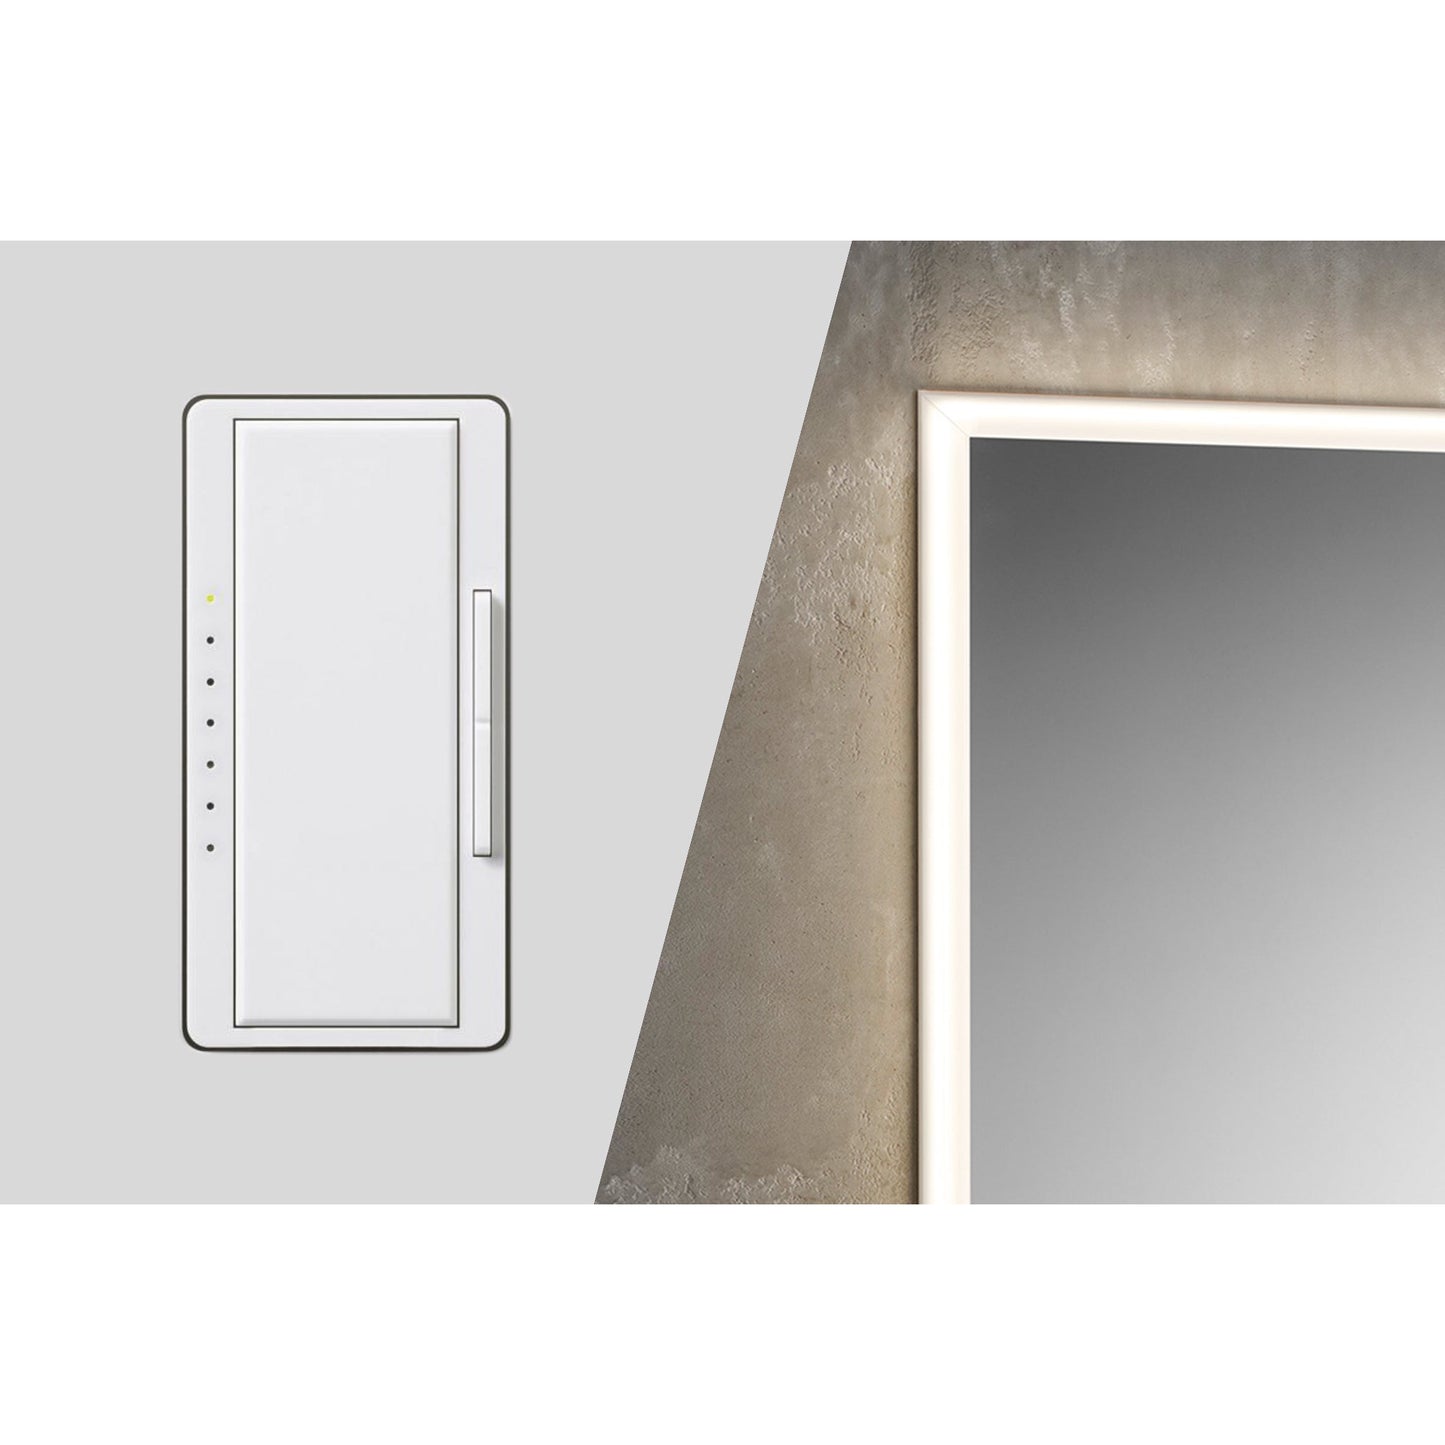 Sidler Quadro 24" x 36" 3000K Single Left Hinged Mirror Door Anodized Aluminum Medicine Cabinet With Night Light Function, Built-in GFCI Outlet and USB port